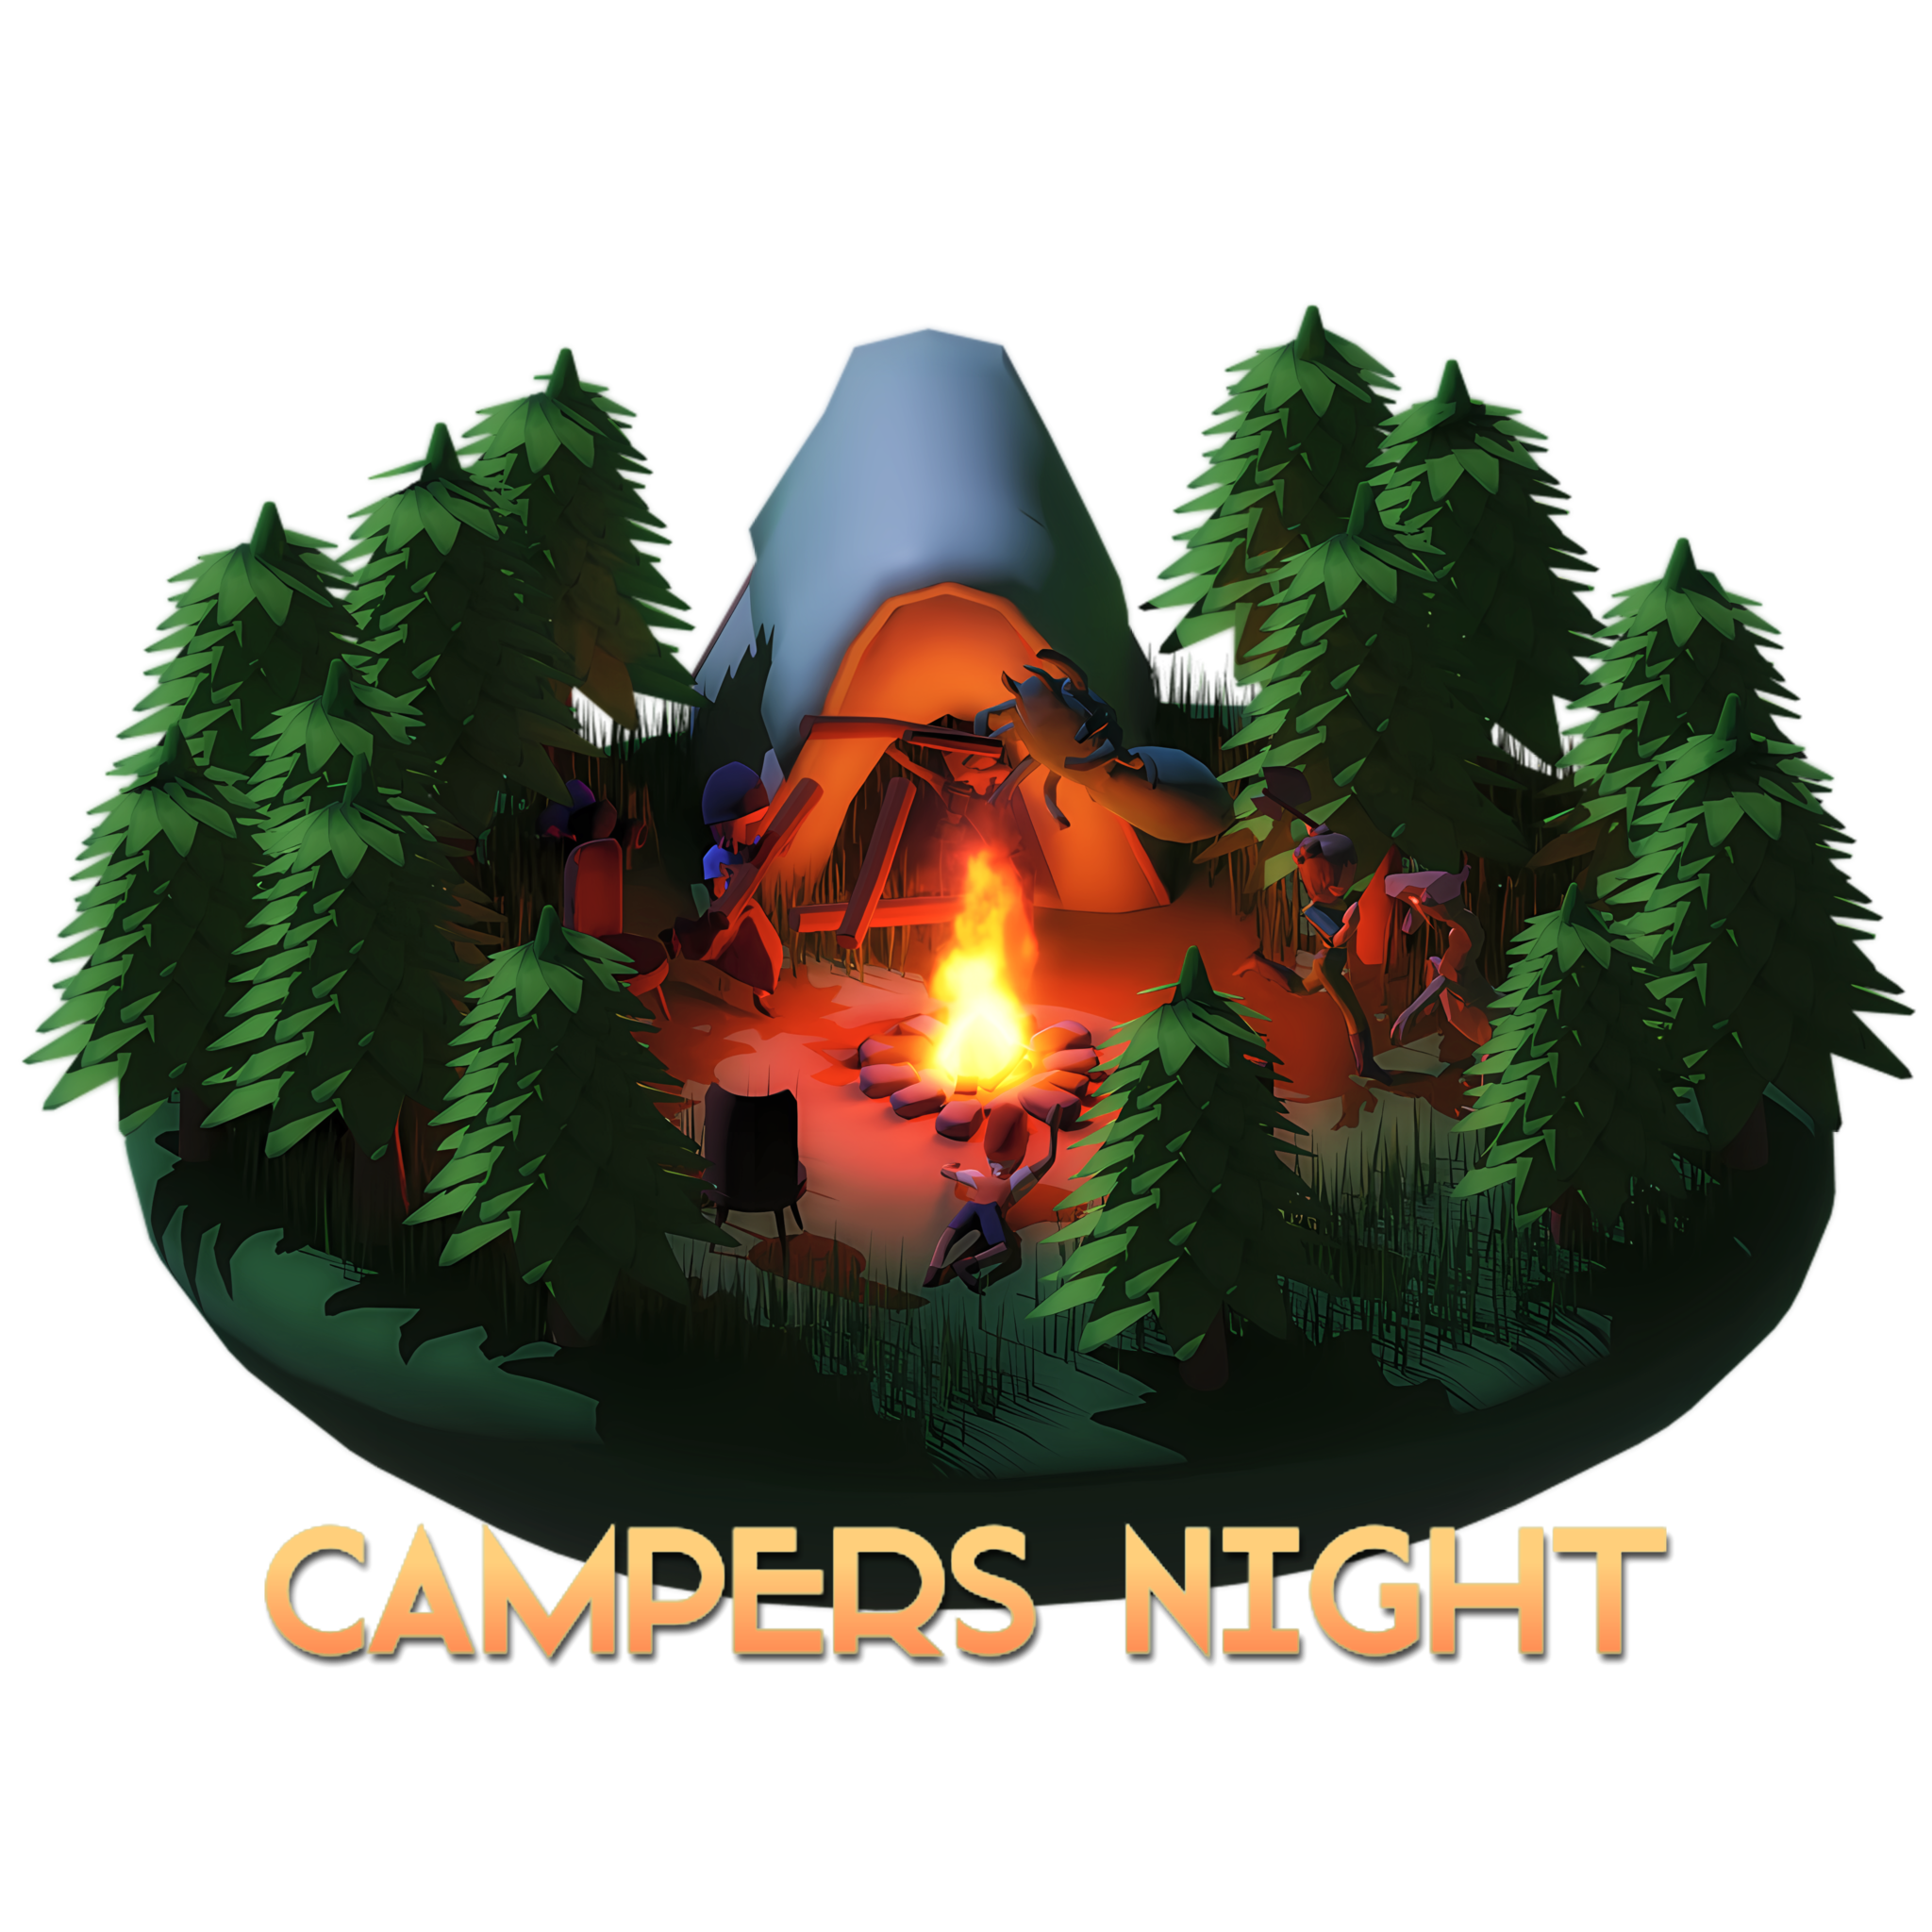 Campers Night